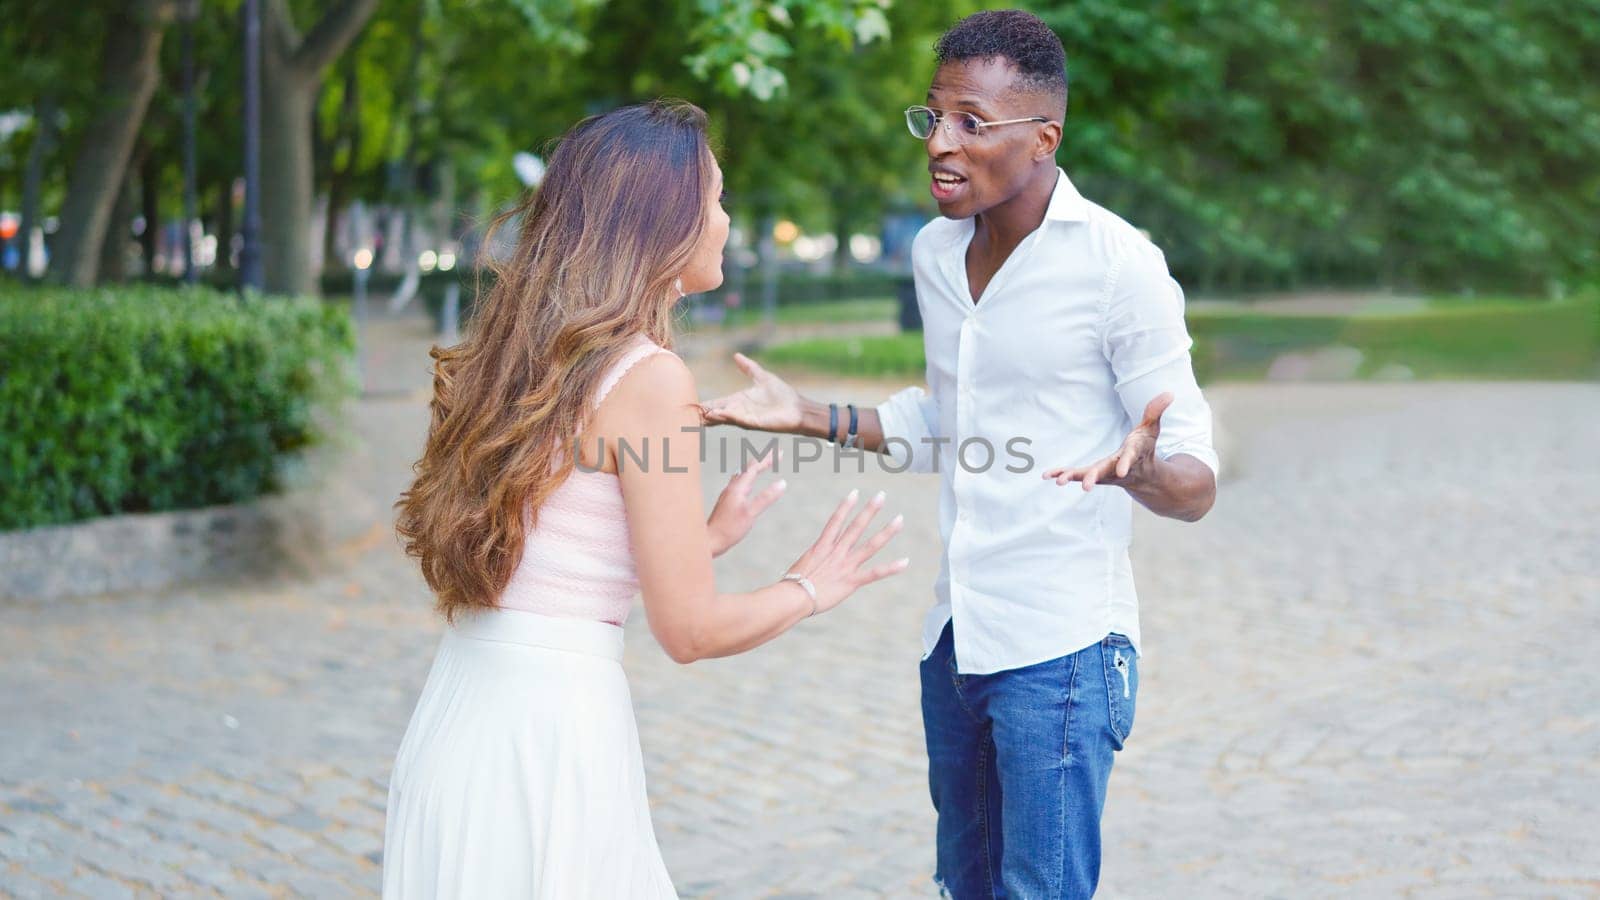 Woman trying to calm down her angry boyfriend